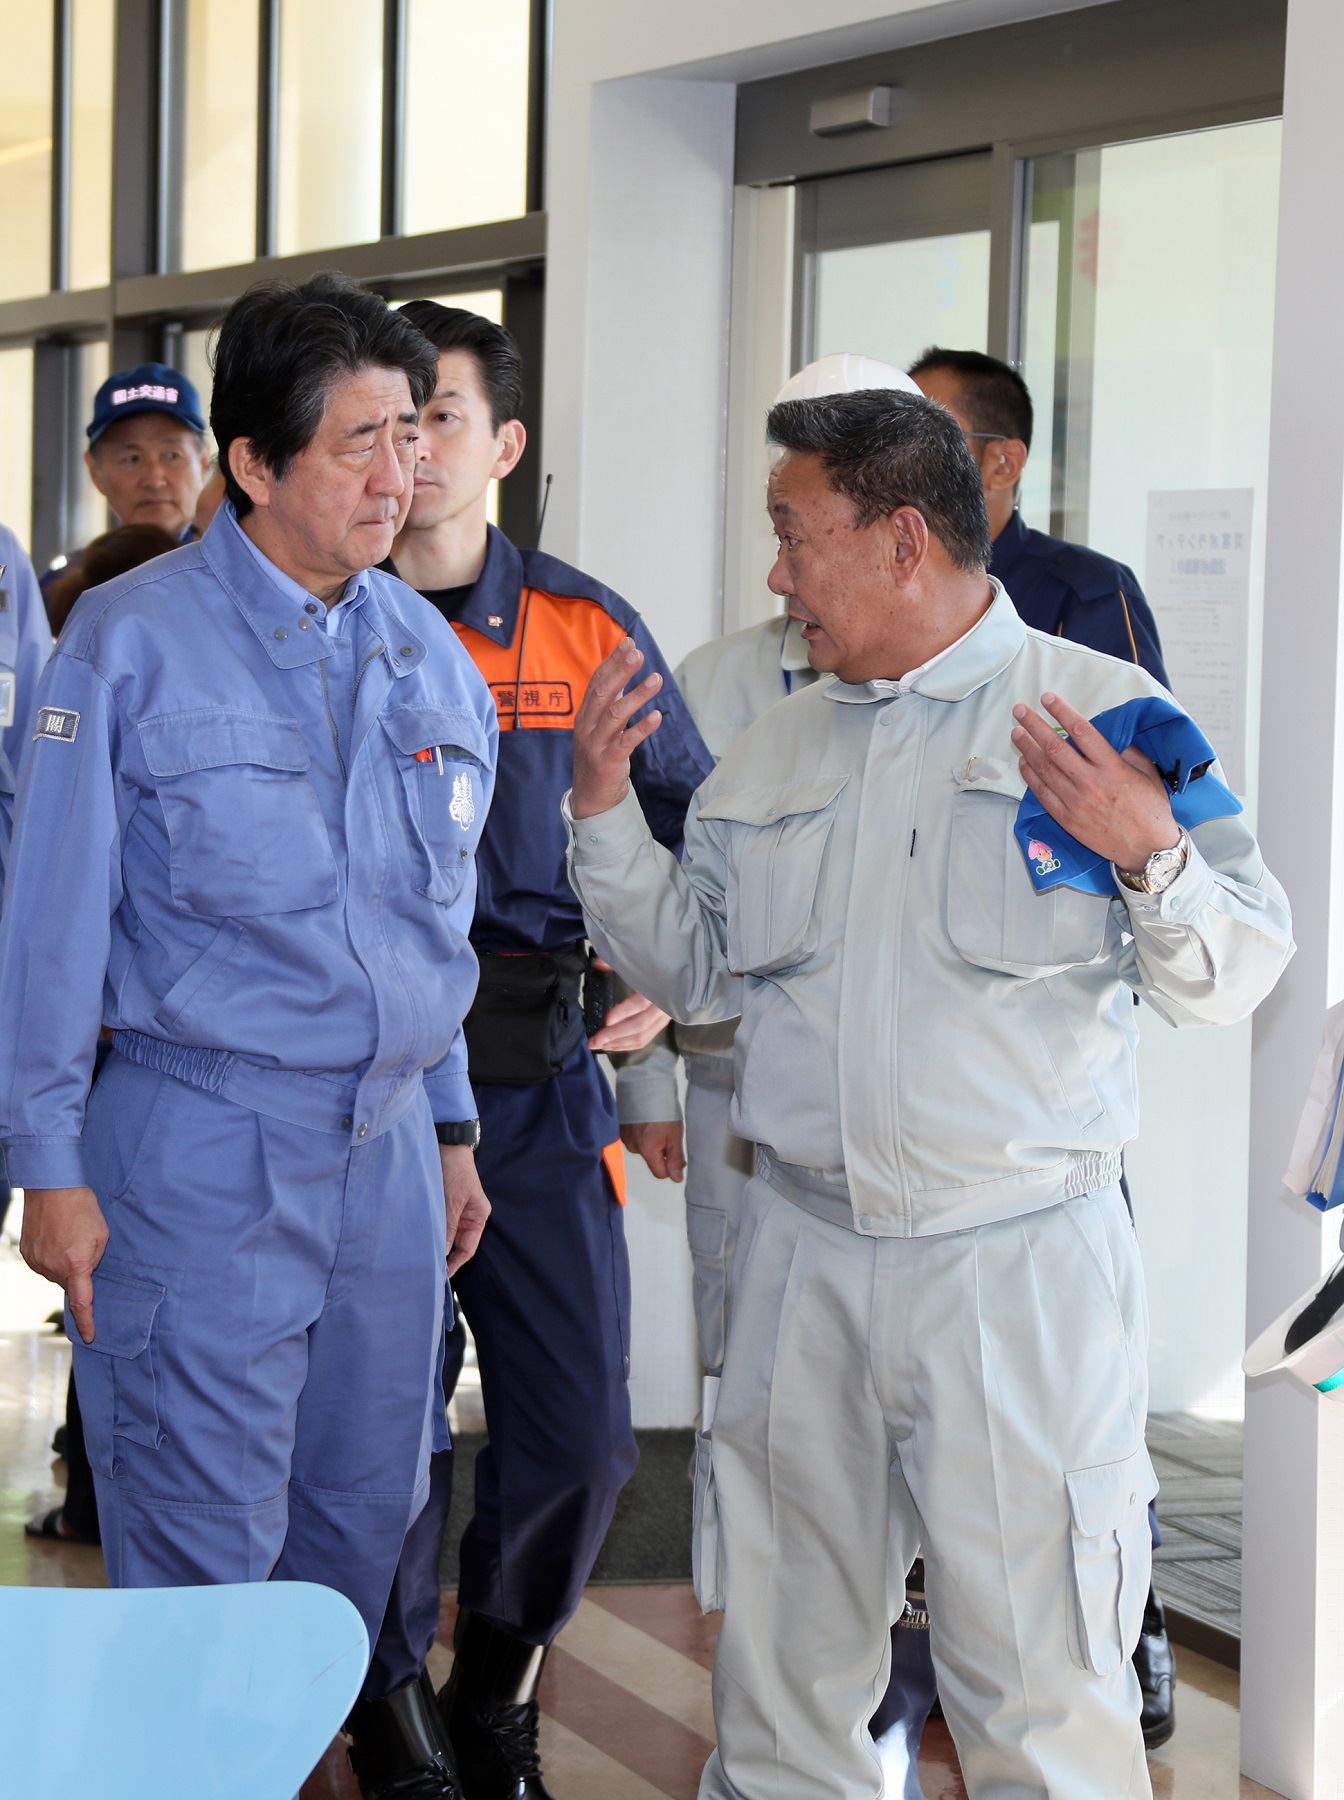 Photograph of the Prime Minister visiting an evacuation center in Motomiya City, Fukushima Prefecture (1)